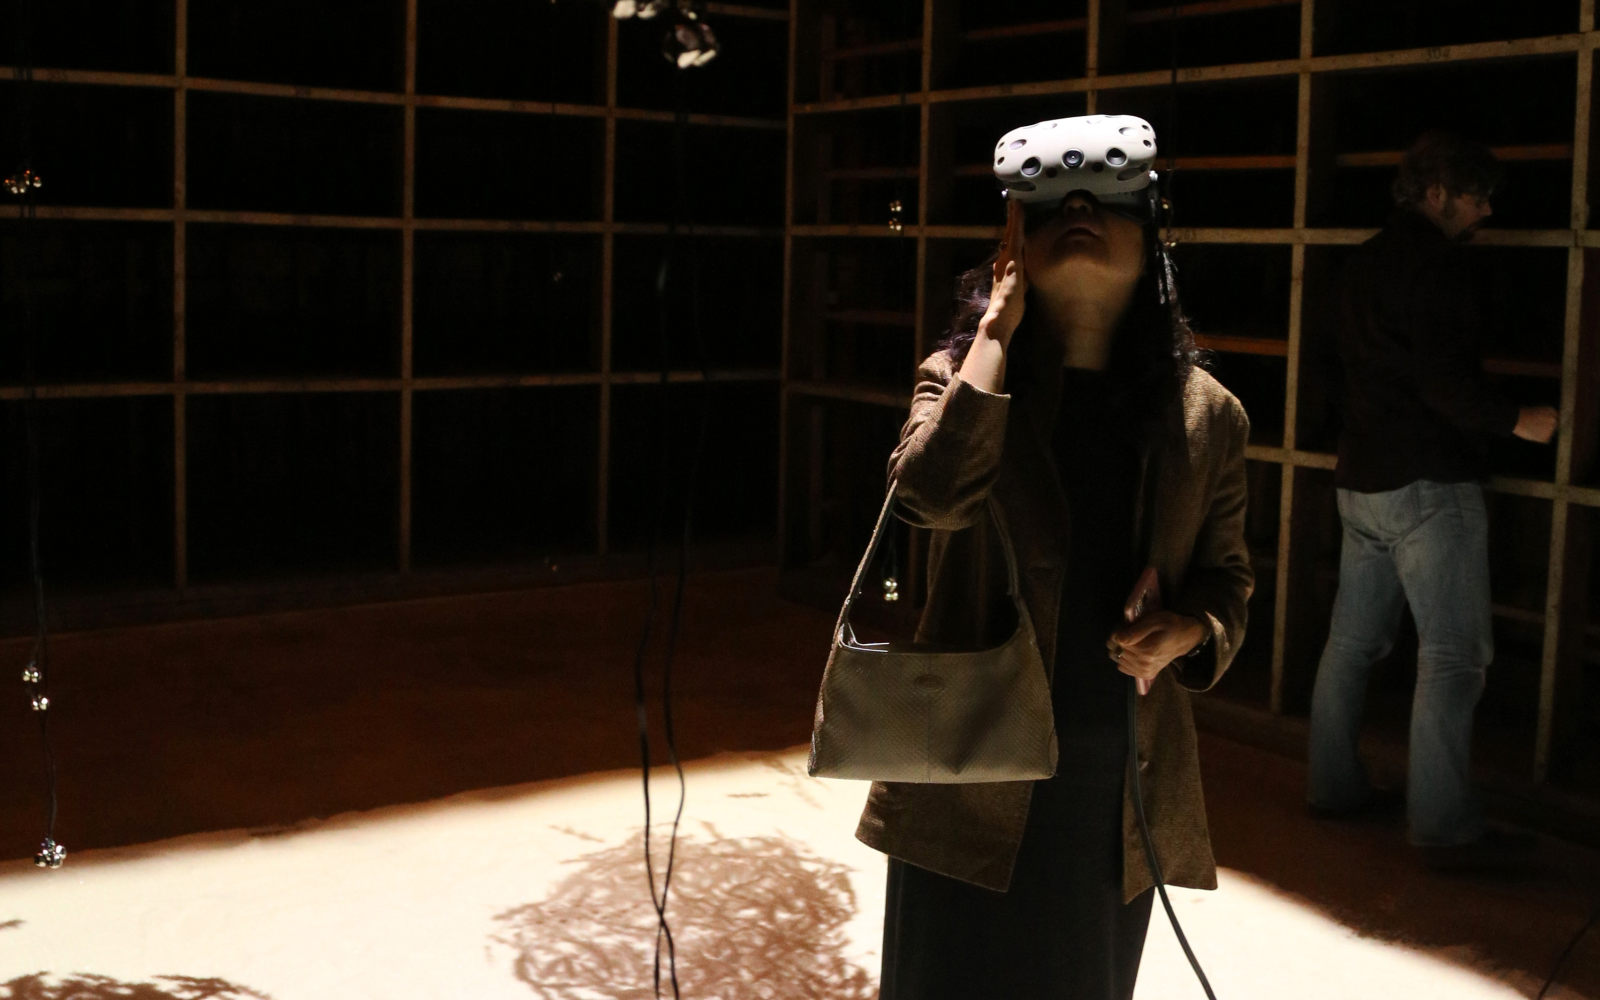 A visitor in a darkened room looks up at the ceiling through VR glasses.